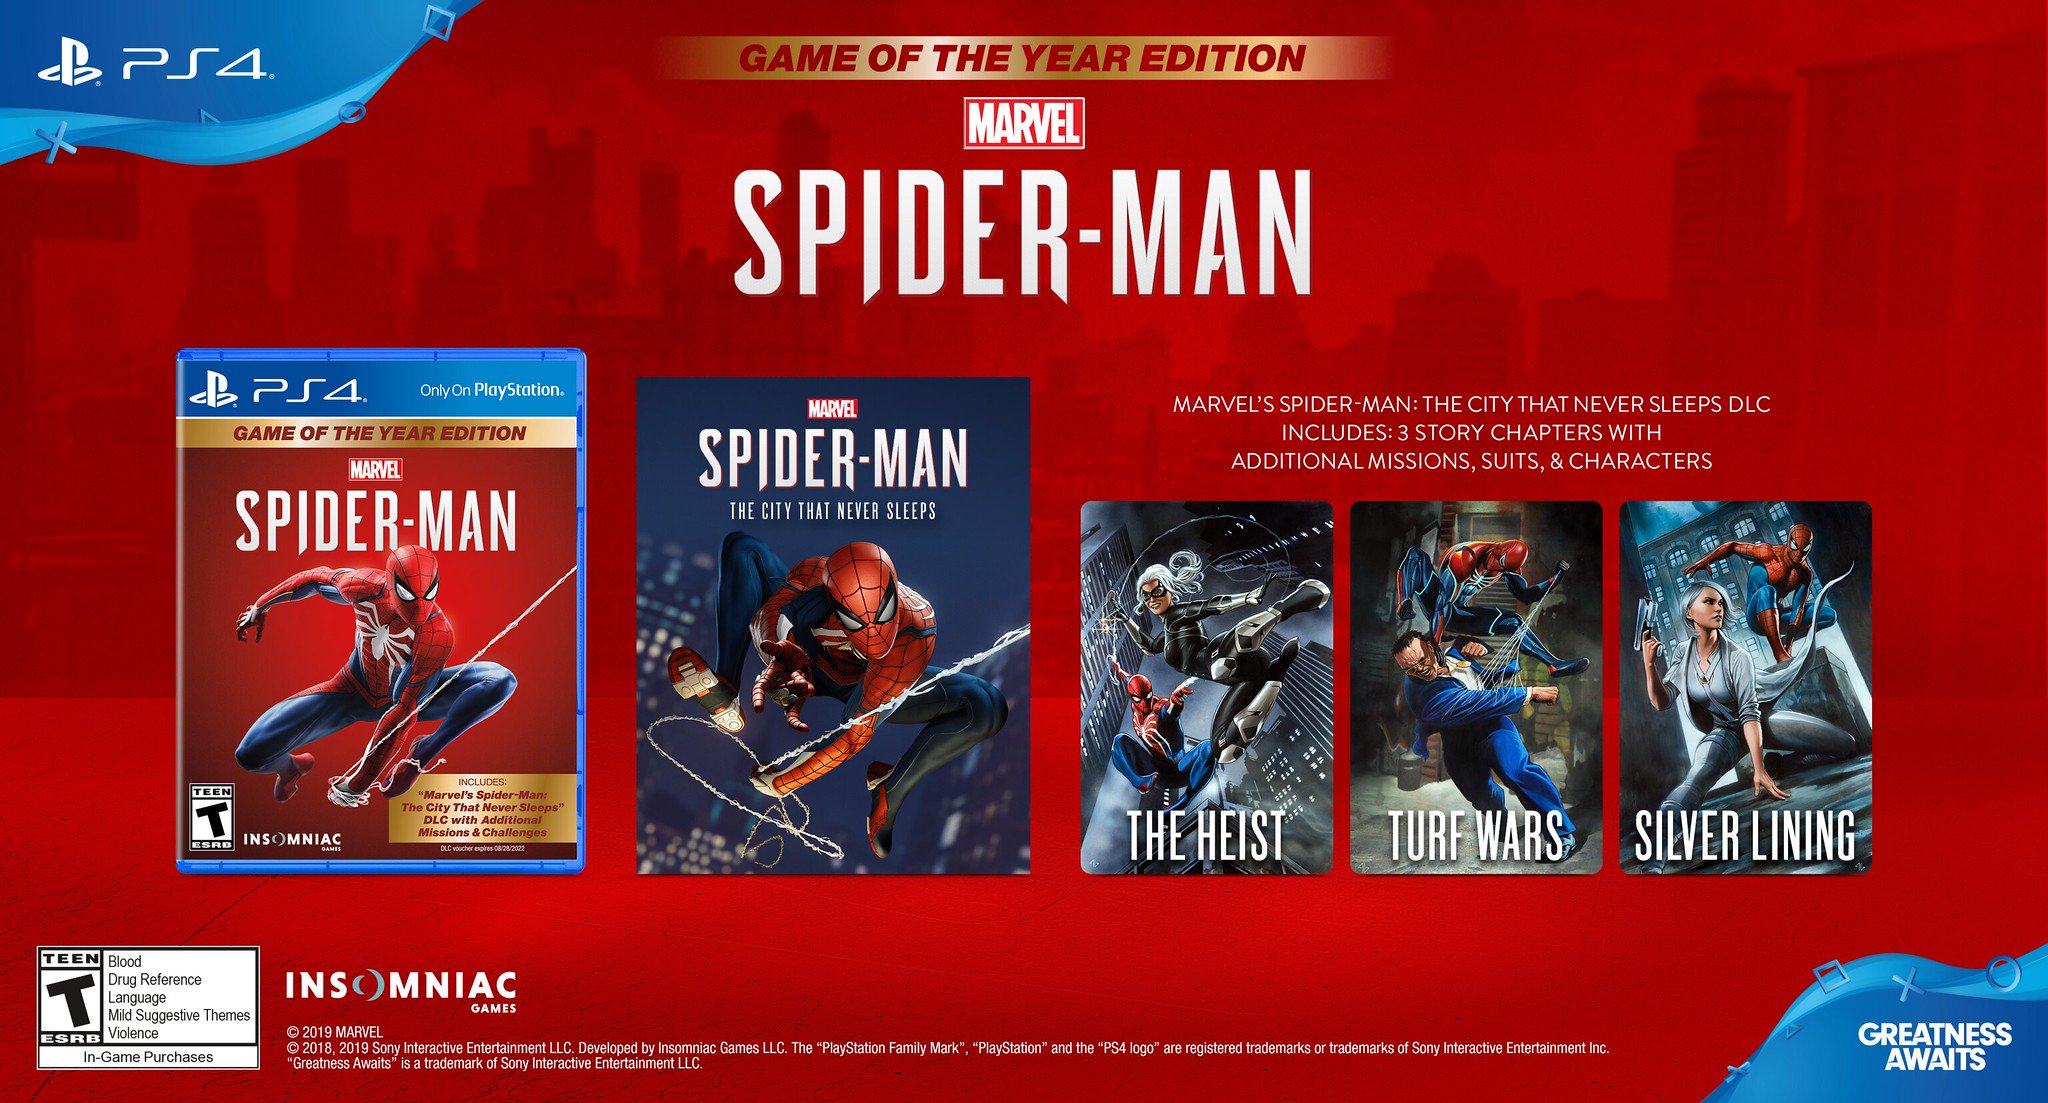 skruenøgle Instrument spil PlayStation on Twitter: "Marvel's Spider-Man: Game of the Year Edition  comes packed with the complete The City That Never Sleeps DLC story arc in  addition to the full game. Available now for